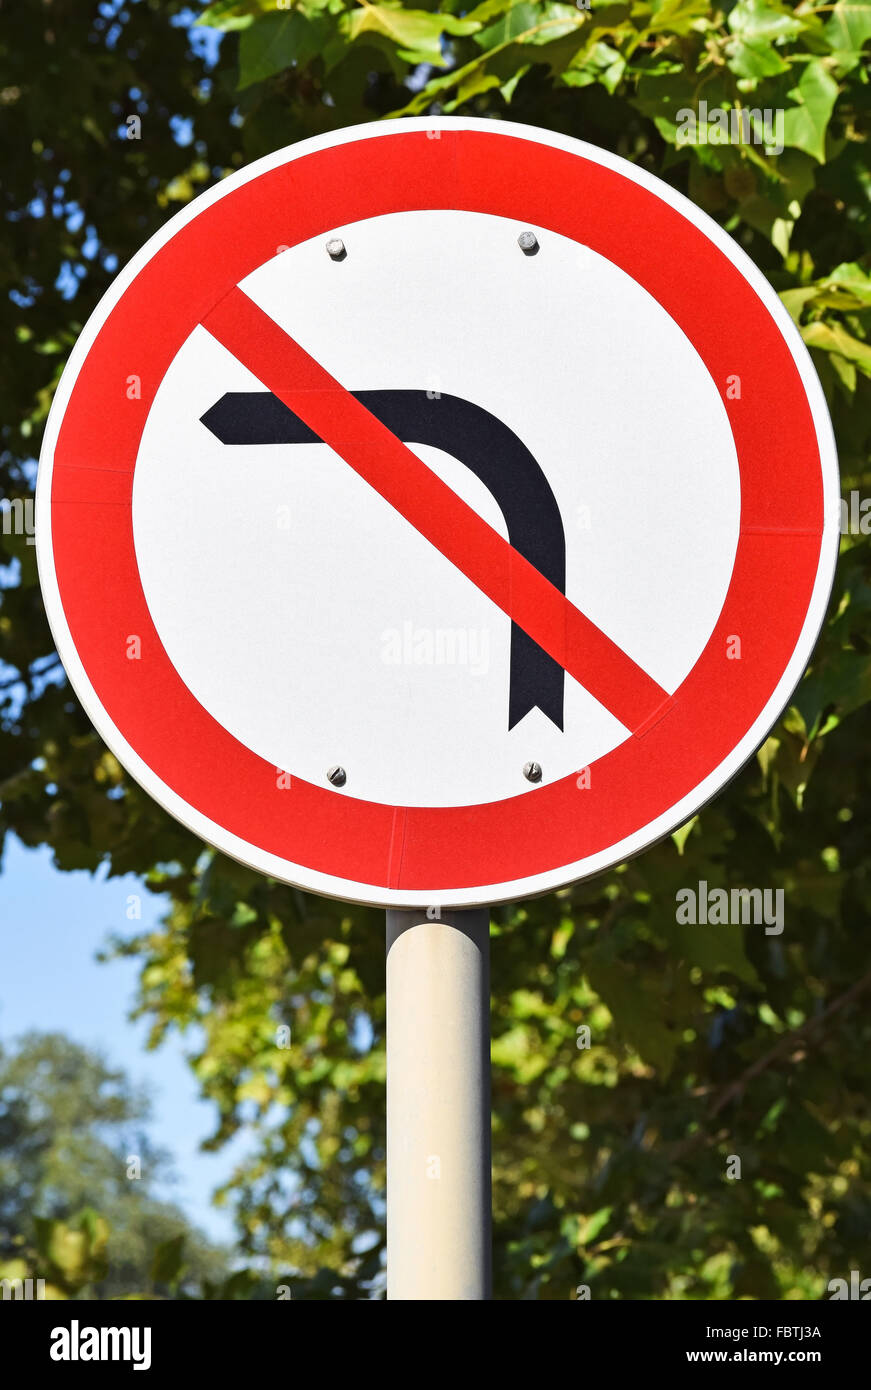 No left turn traffic sign on the road Stock Photo